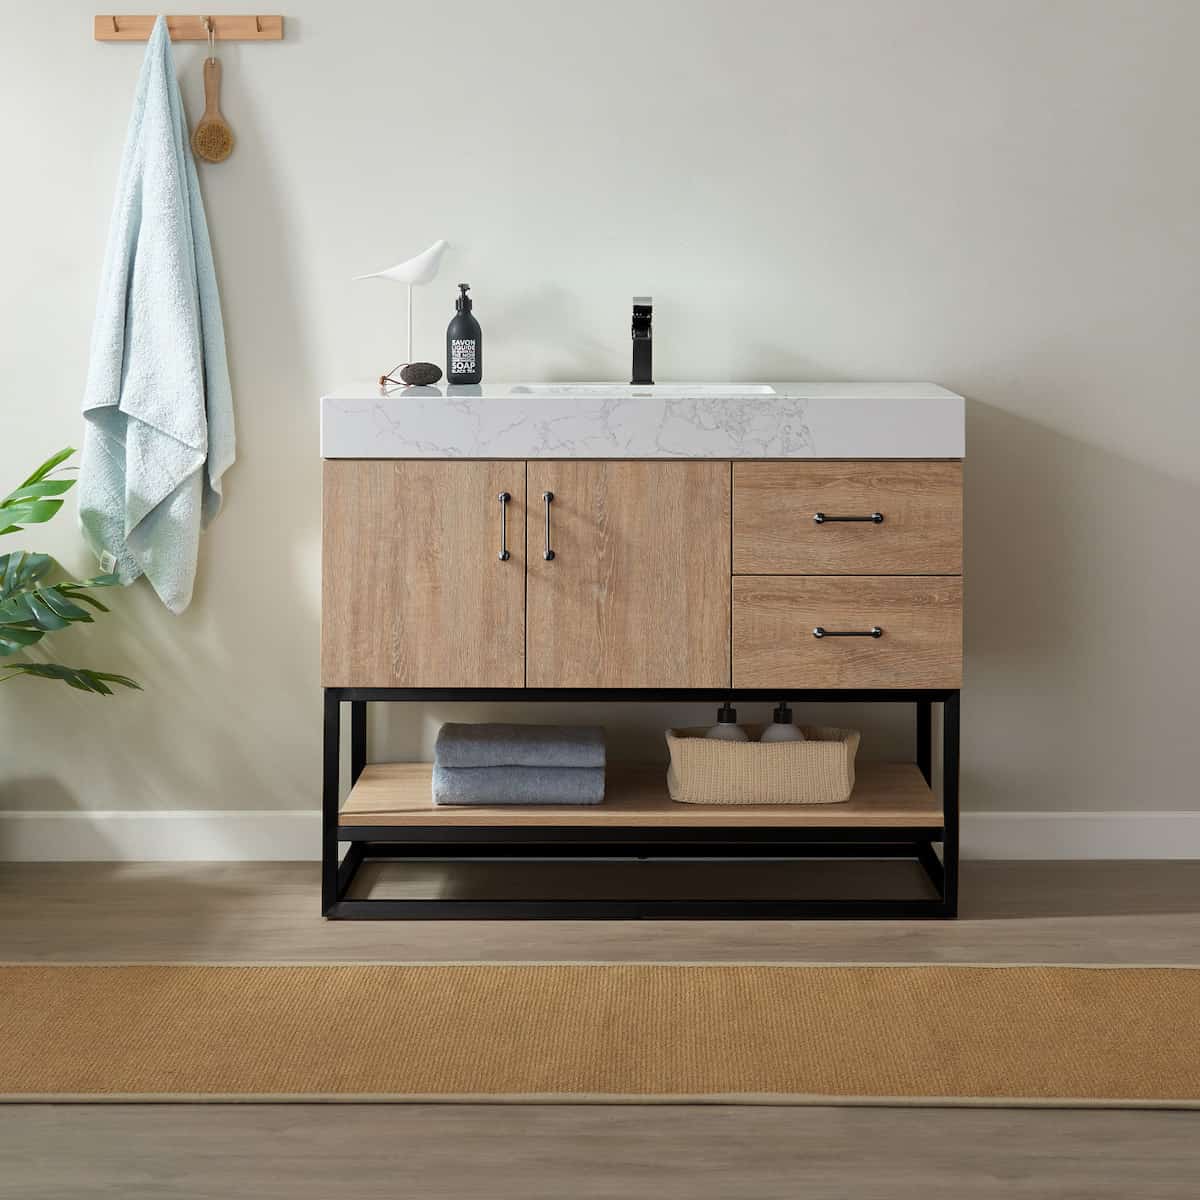 Vinnova Alistair 42 Inch Freestanding Single Vanity in North American Oak and Matte Black Frame with White Grain Stone Countertop Without Mirror in Bathroom 789042B-NO-GW-NM